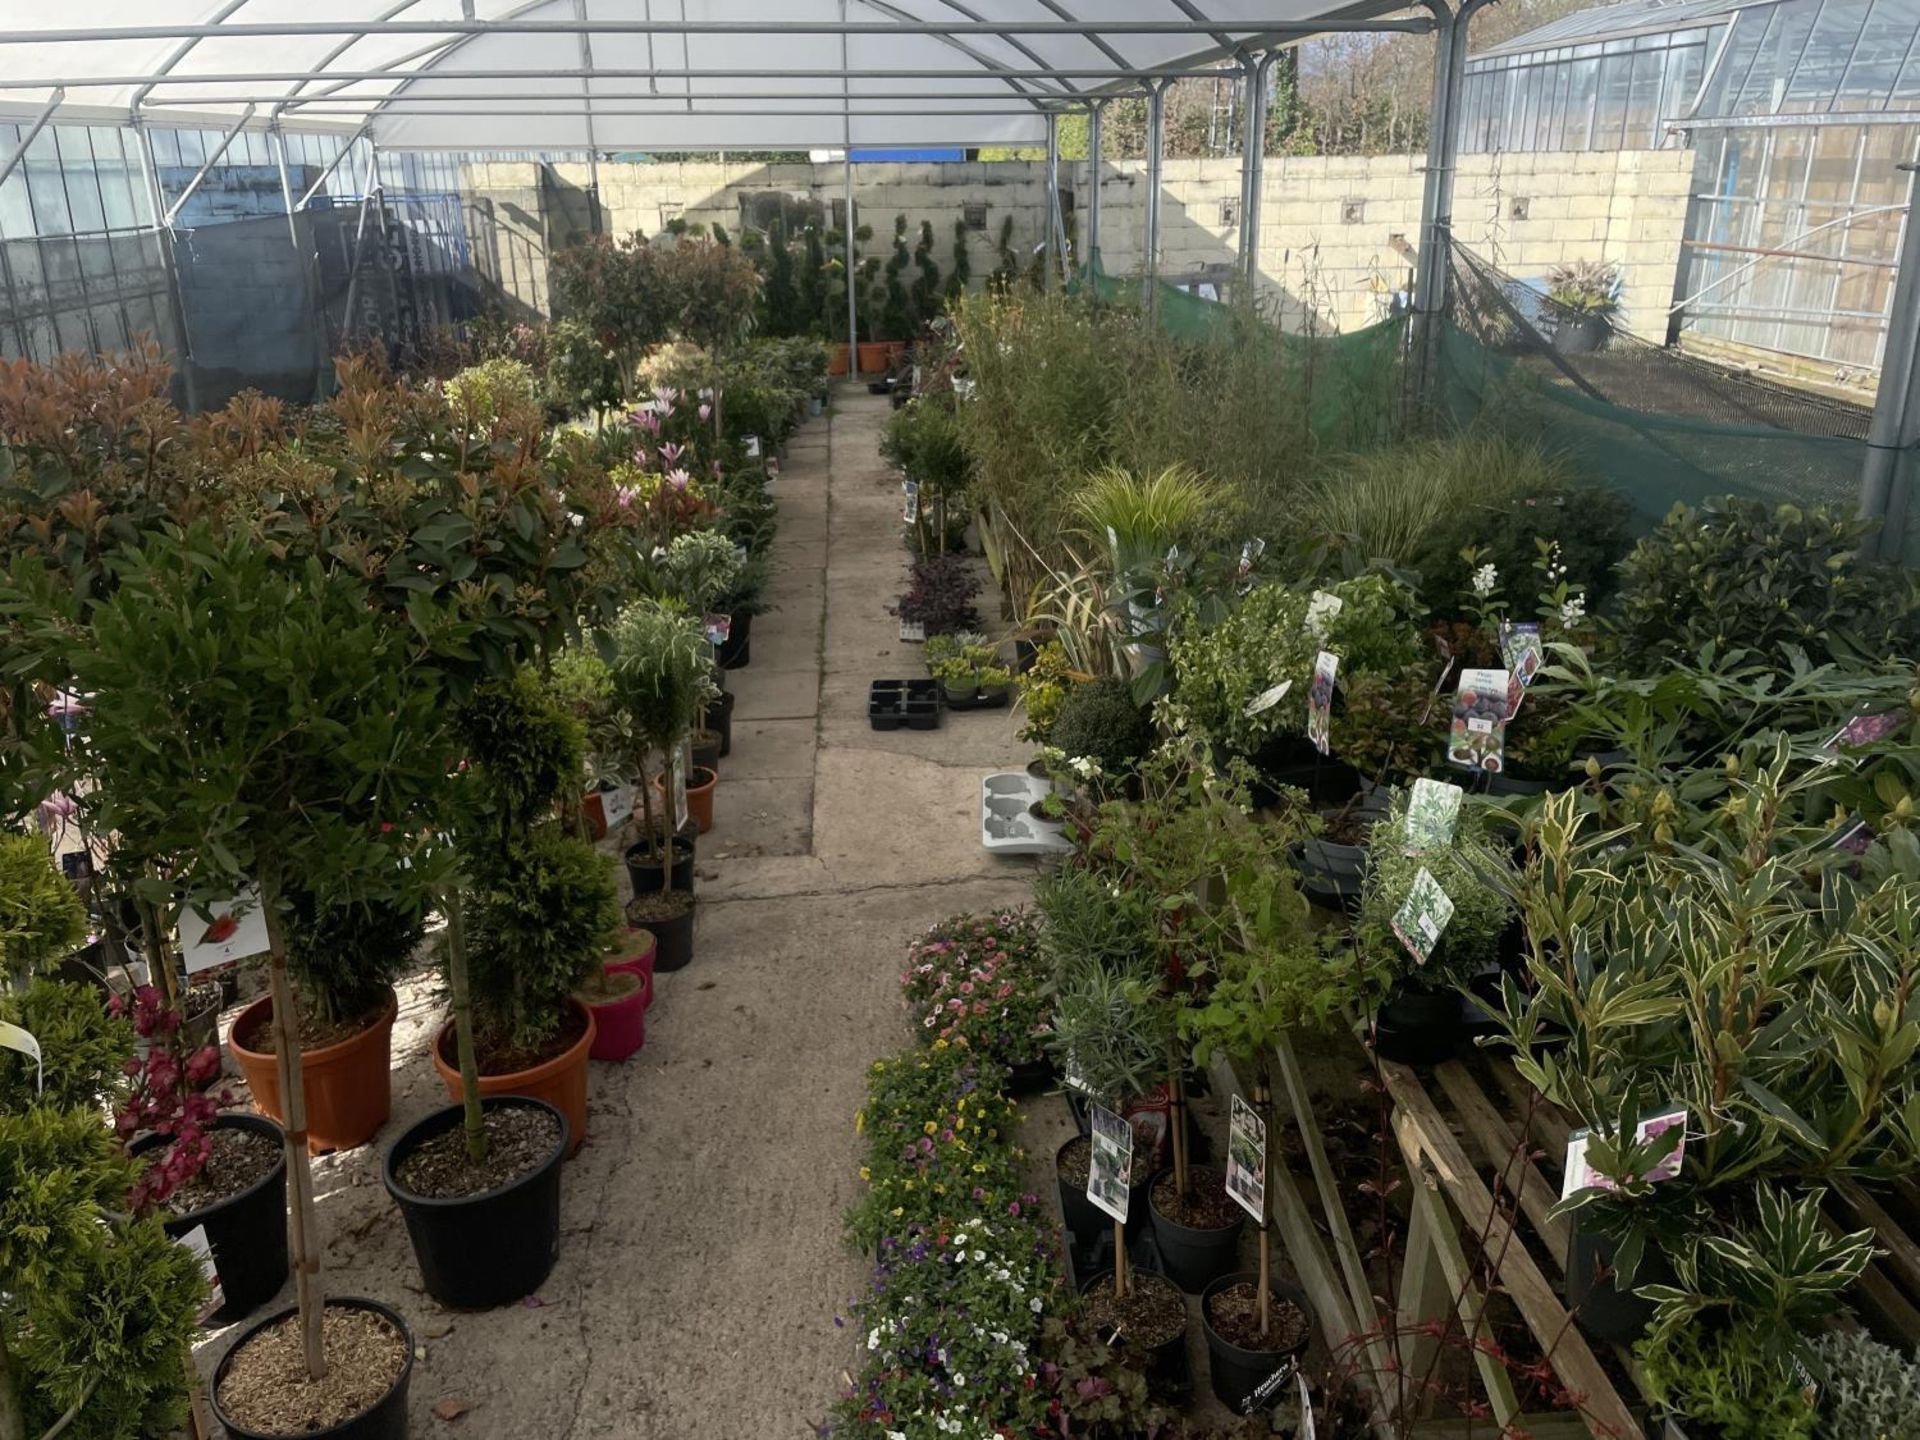 WELCOME TO ASHLEY WALLER HORTICULTURE AUCTION - LOTS ARE BEING ADDED DAILY - THE IMAGES SHOW LOTS - Image 14 of 59